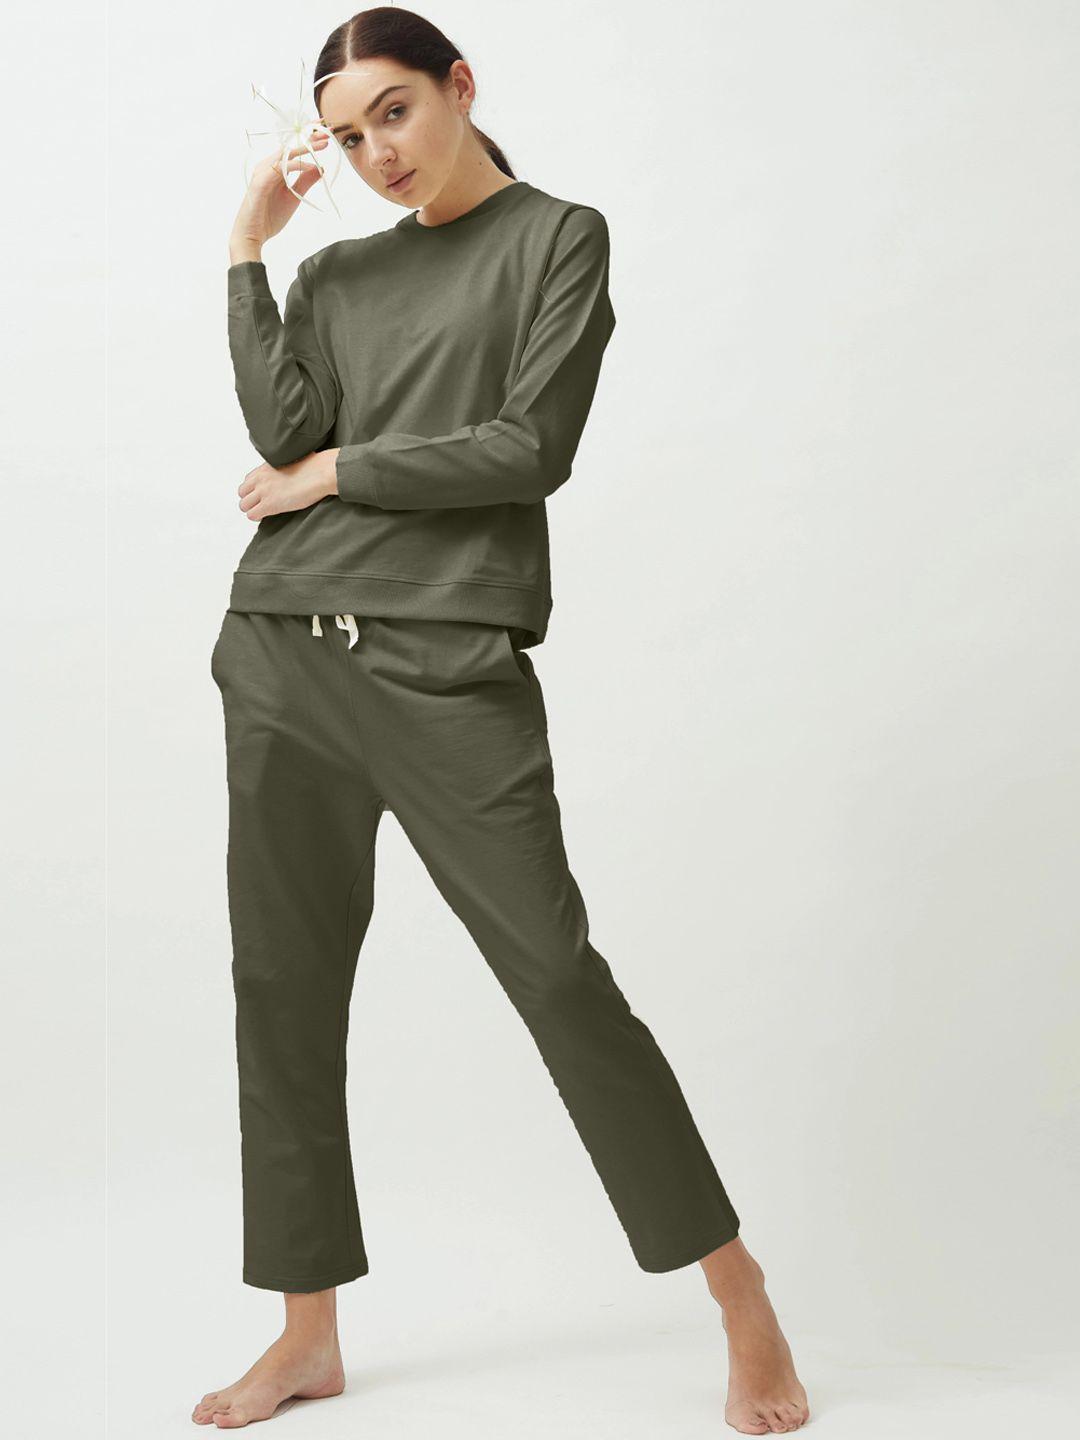 saltpetre long sleeves organic cotton sweatshirt with straight joggers